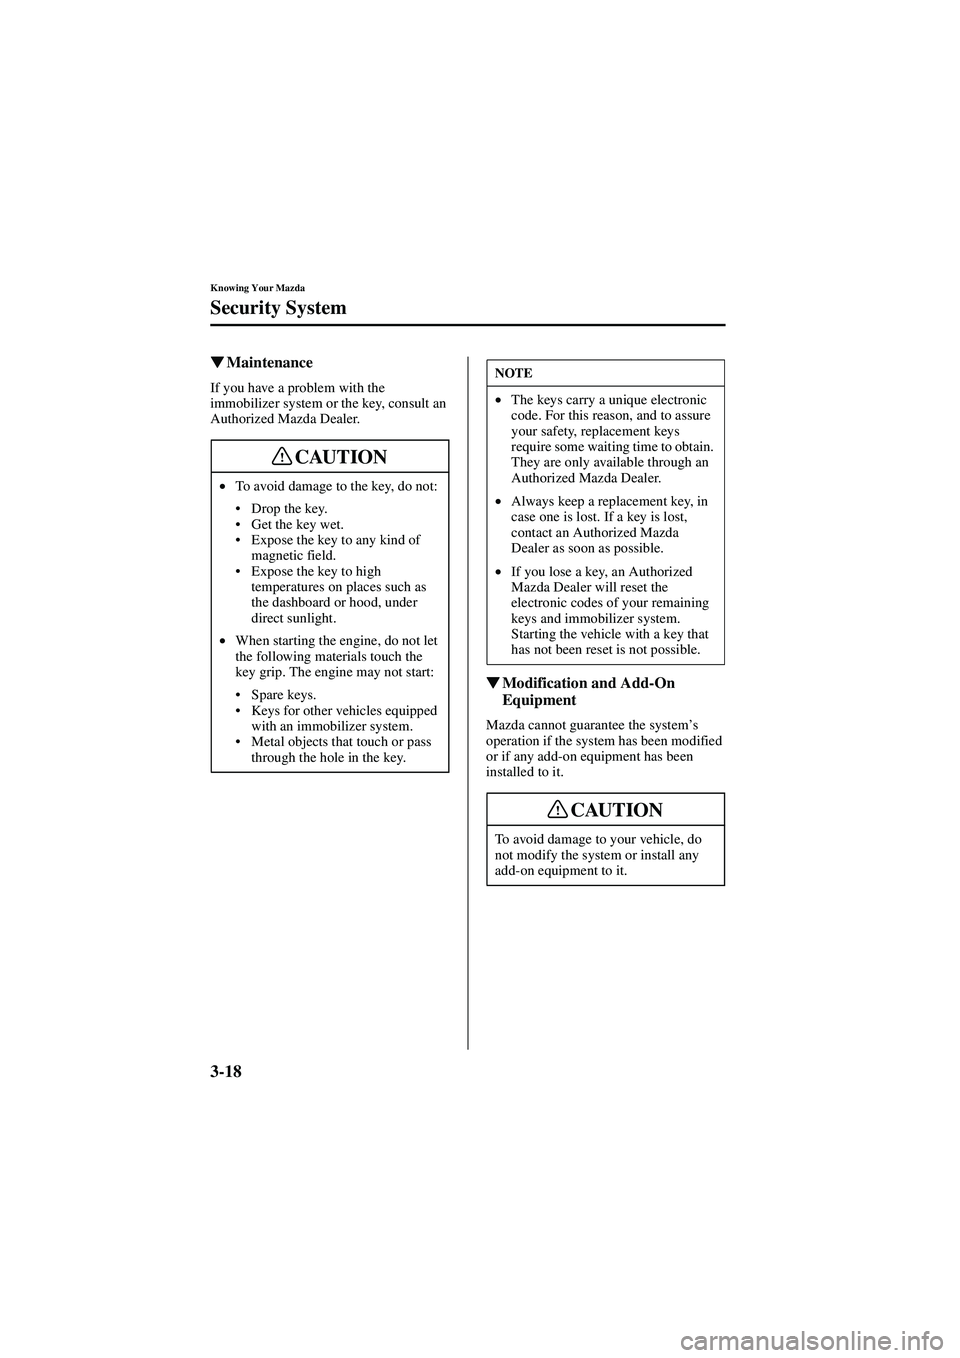 MAZDA MODEL 626 2002  Owners Manual 3-18
Knowing Your Mazda
Security System
Form No. 8Q50-EA-01G

  Maintenance
If you have a problem with the 
immobilizer system or the key, consult an 
Authorized Mazda Dealer.

  Modification 